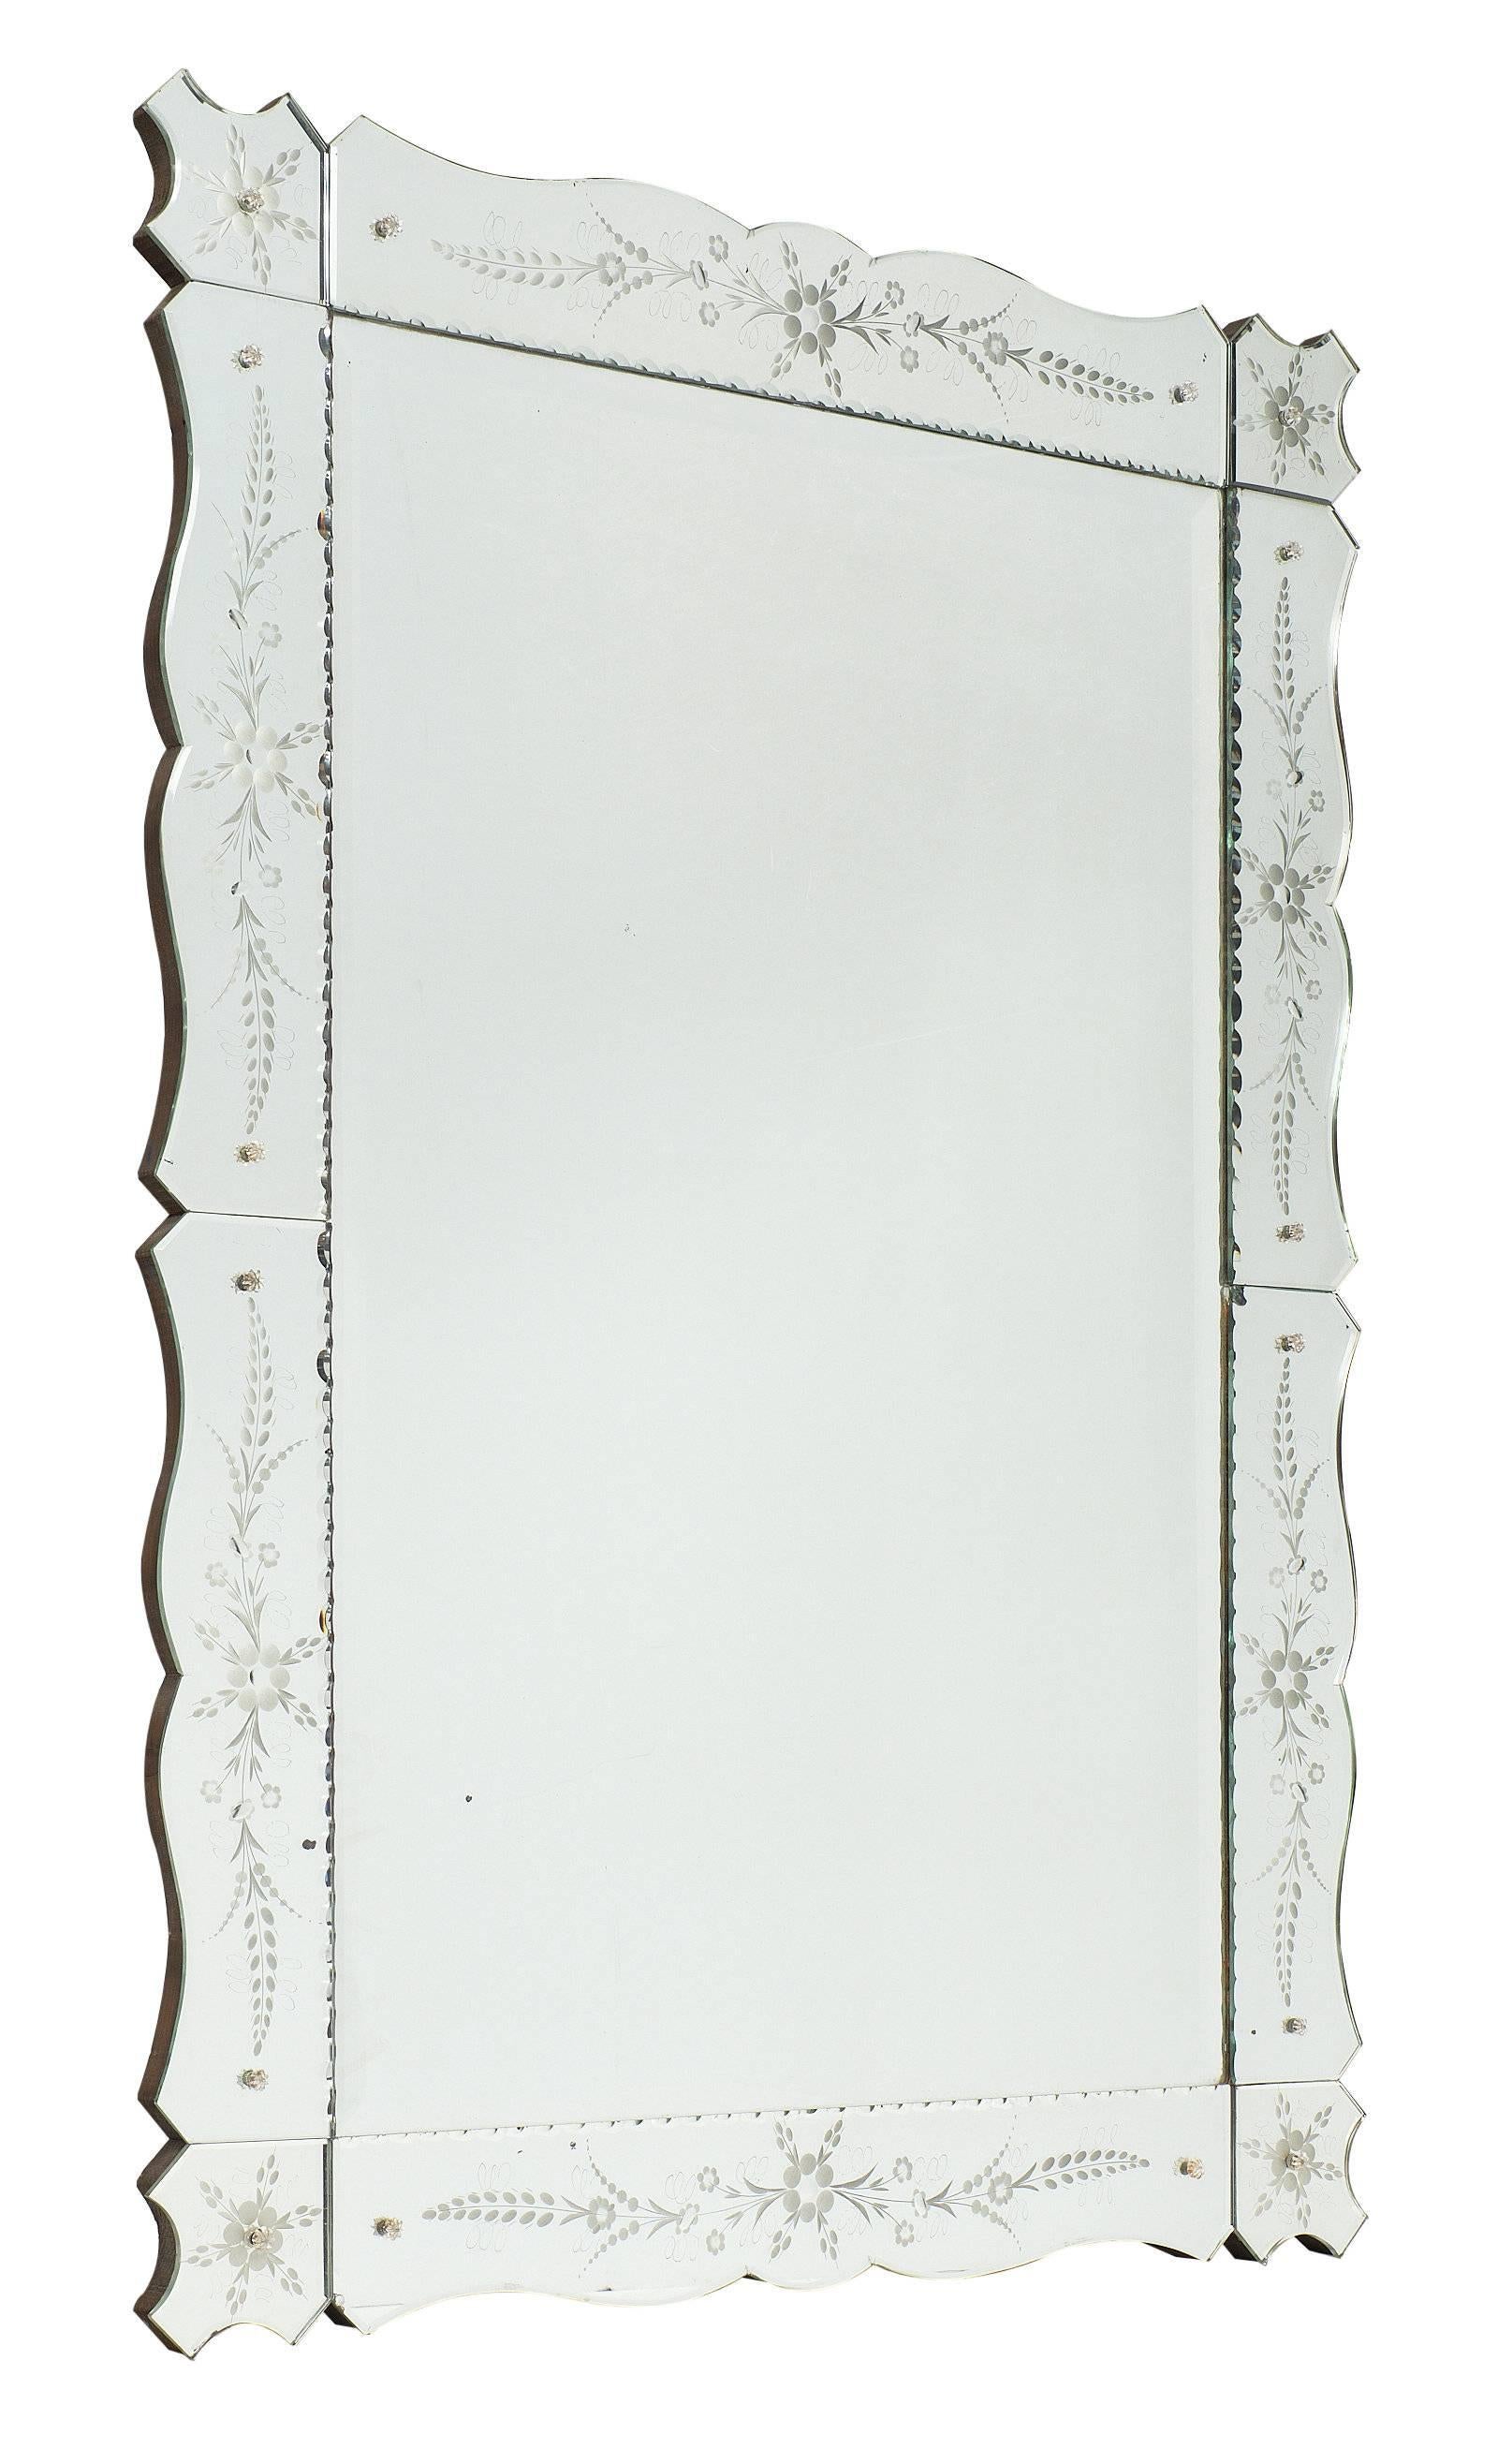 An Art Deco French mirror from the Art Deco period in a rectangular shape. The frame is made of mirror as well, with finely engraved floral details. The frame is also scalloped. This piece is in excellent antique condition.